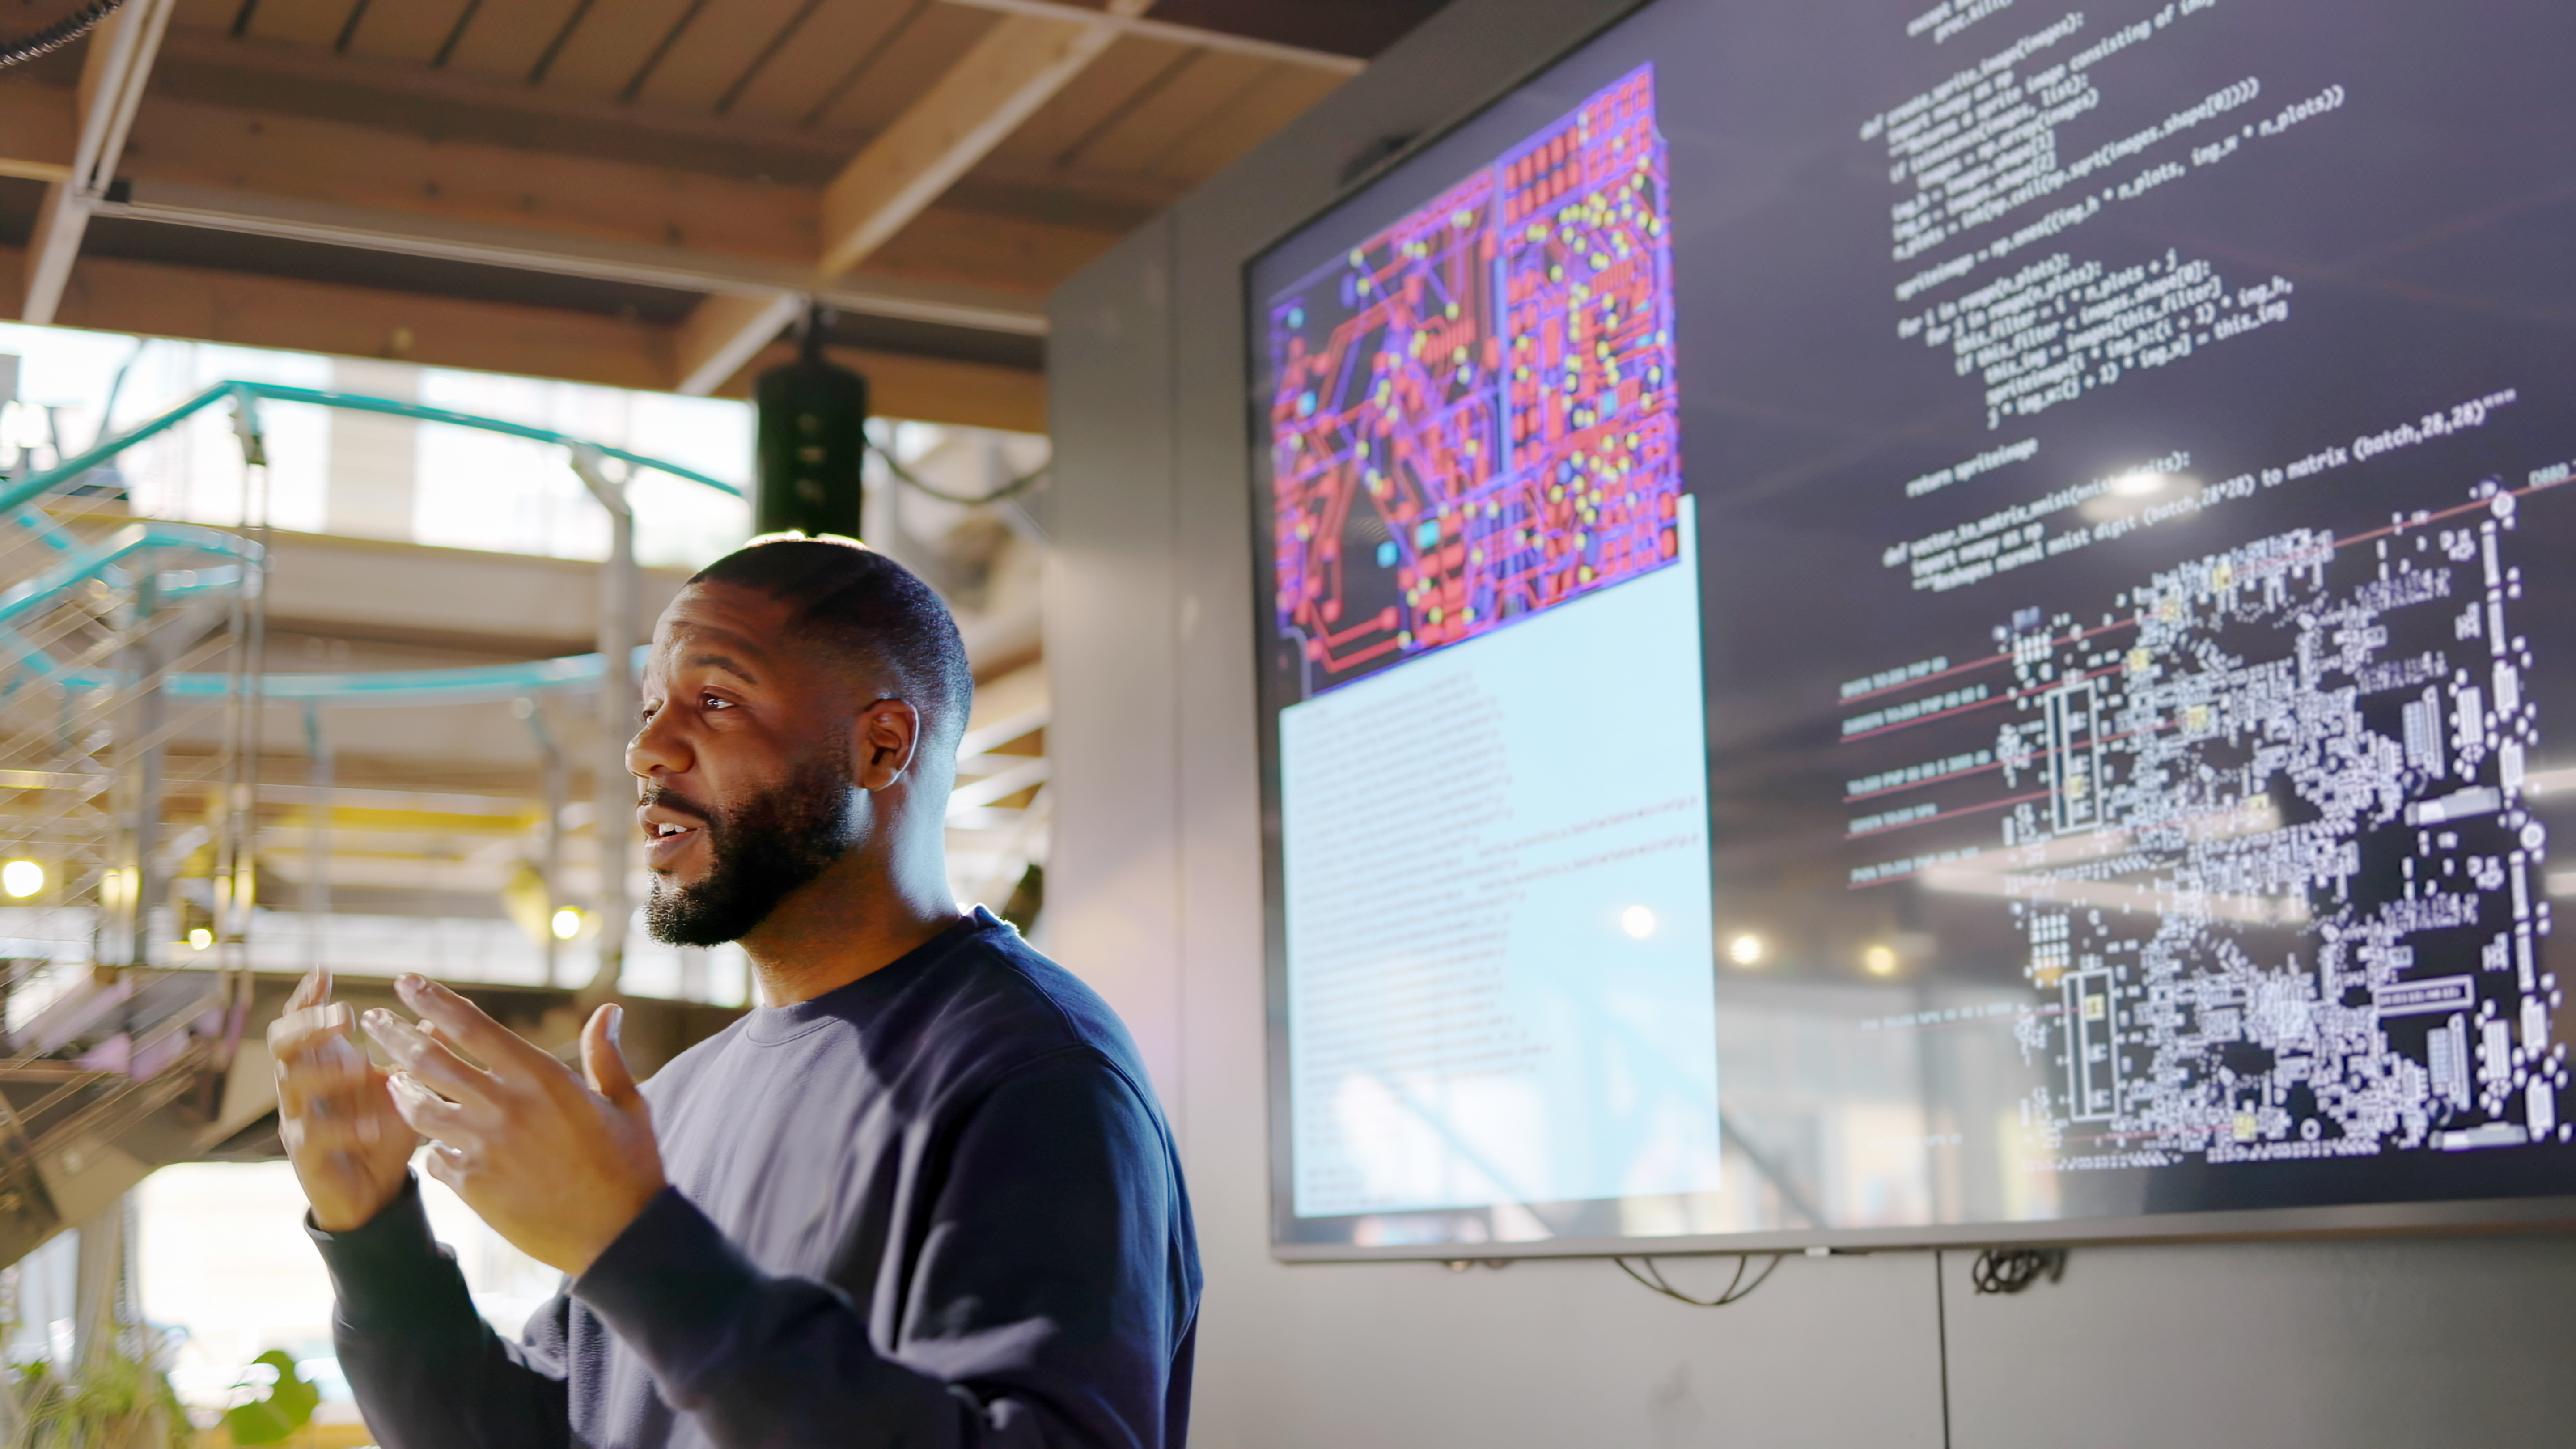 A man is presenting in front of a large screen that shows some data and colourful imagery.